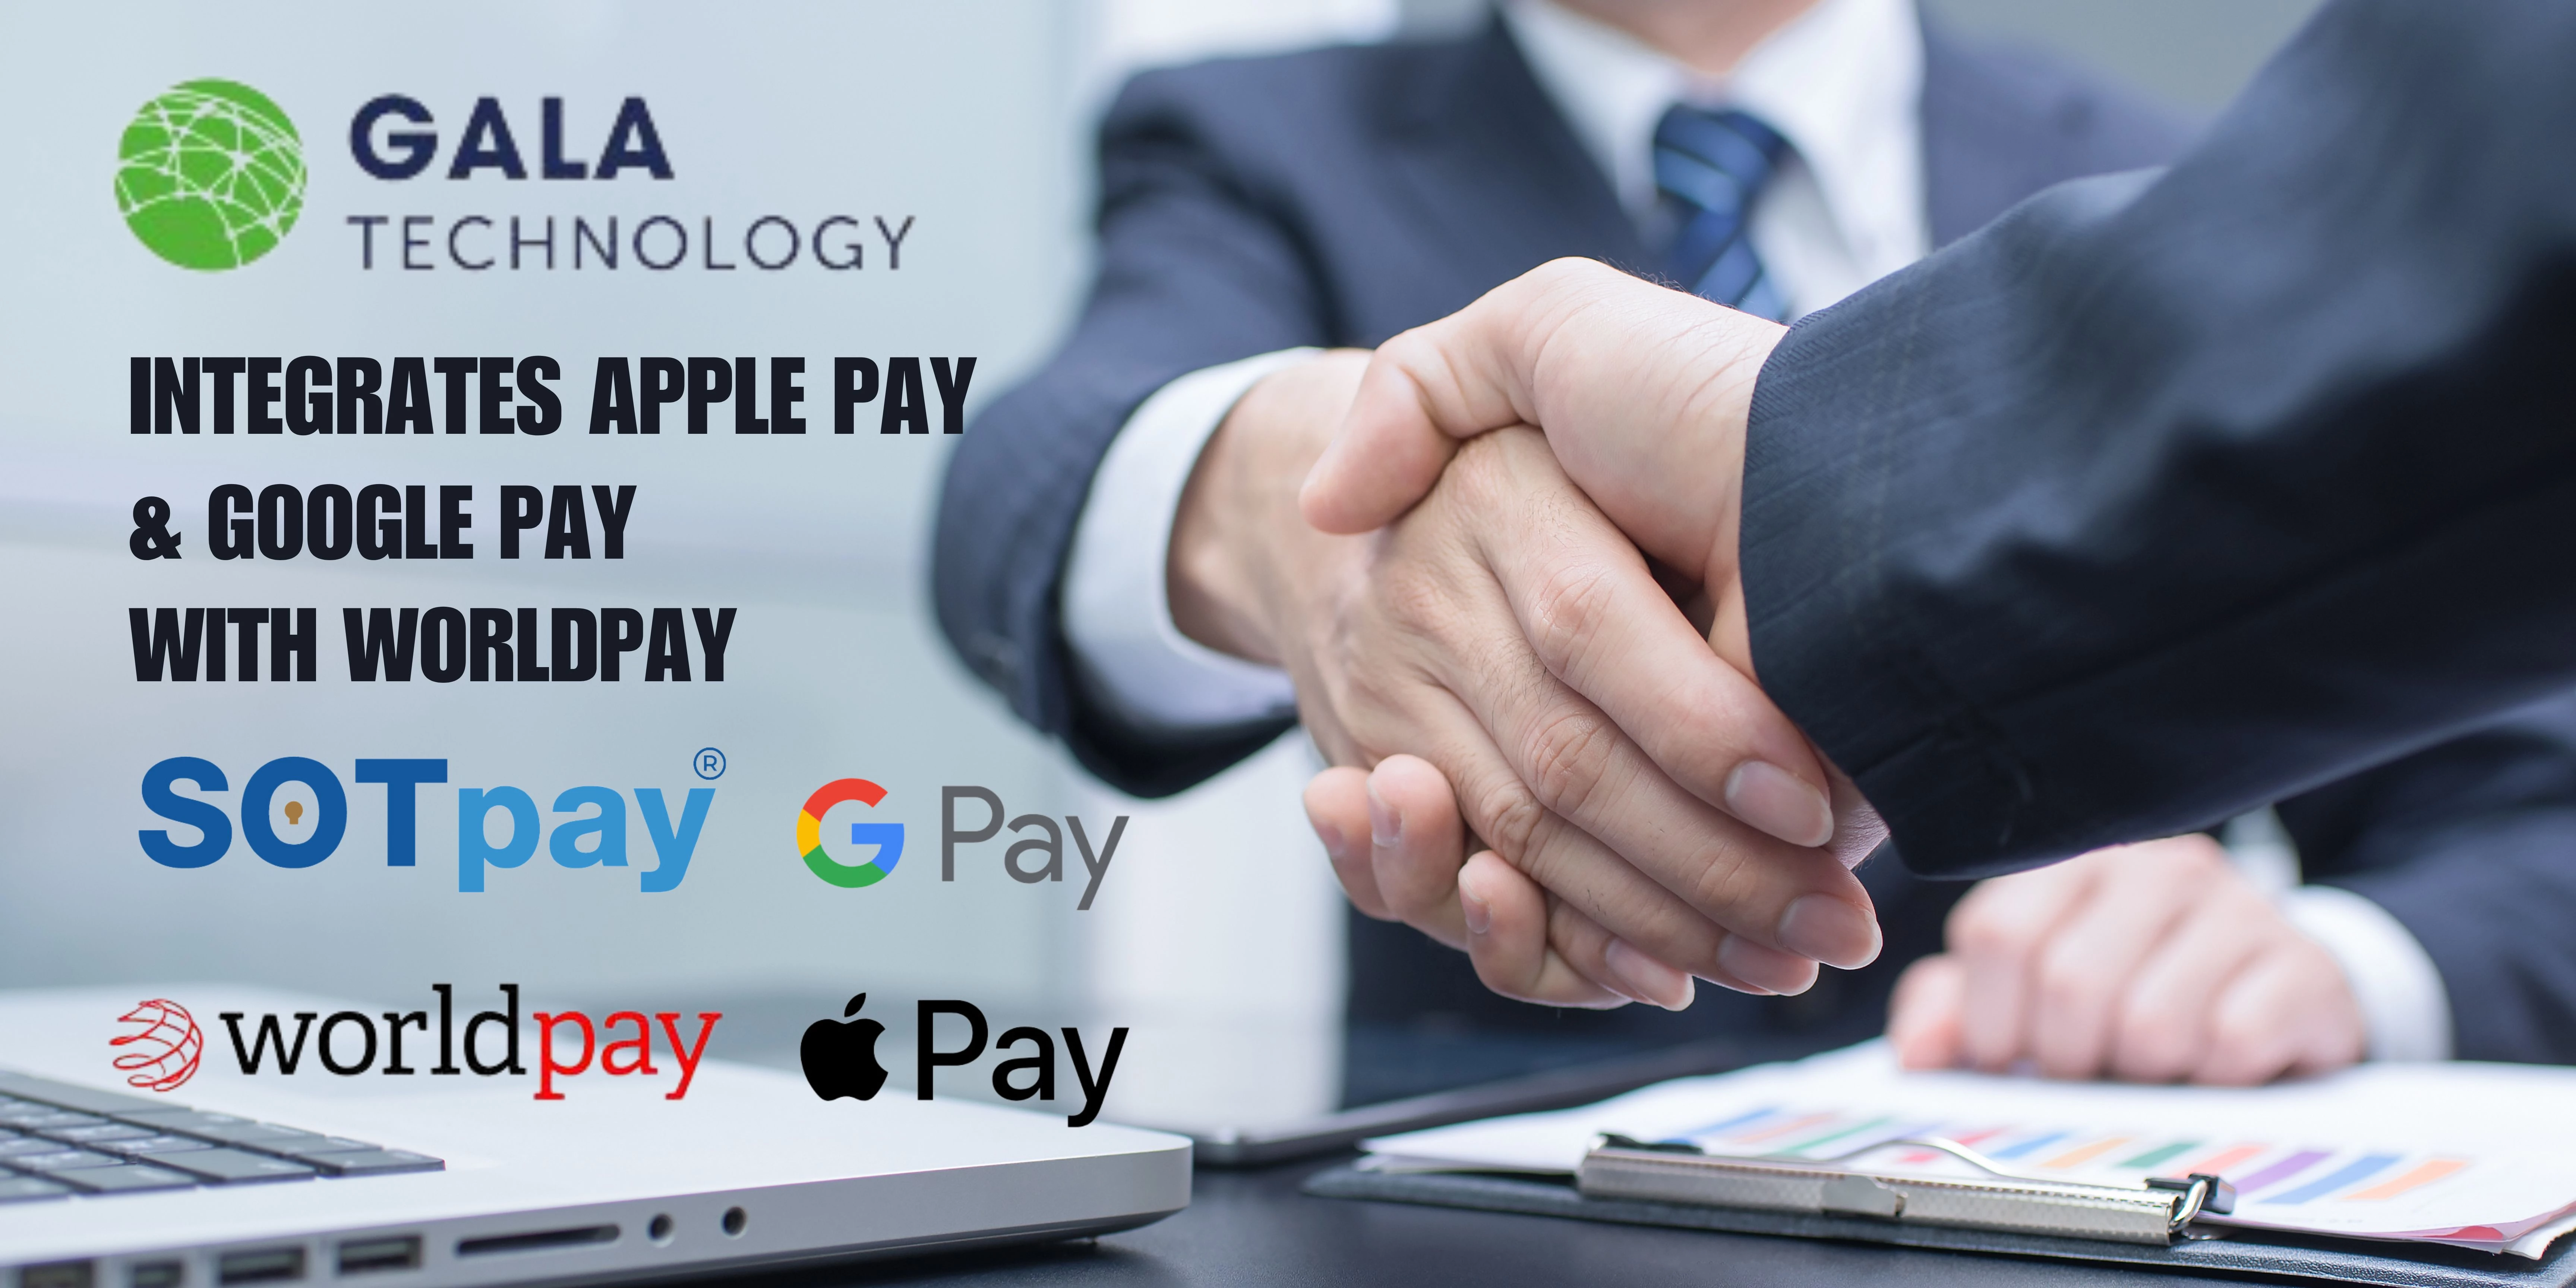 Revolutionising Digital Payments: Gala Technology Announces Groundbreaking Apple Pay and Google Pay Worldpay Integration in SOTpay